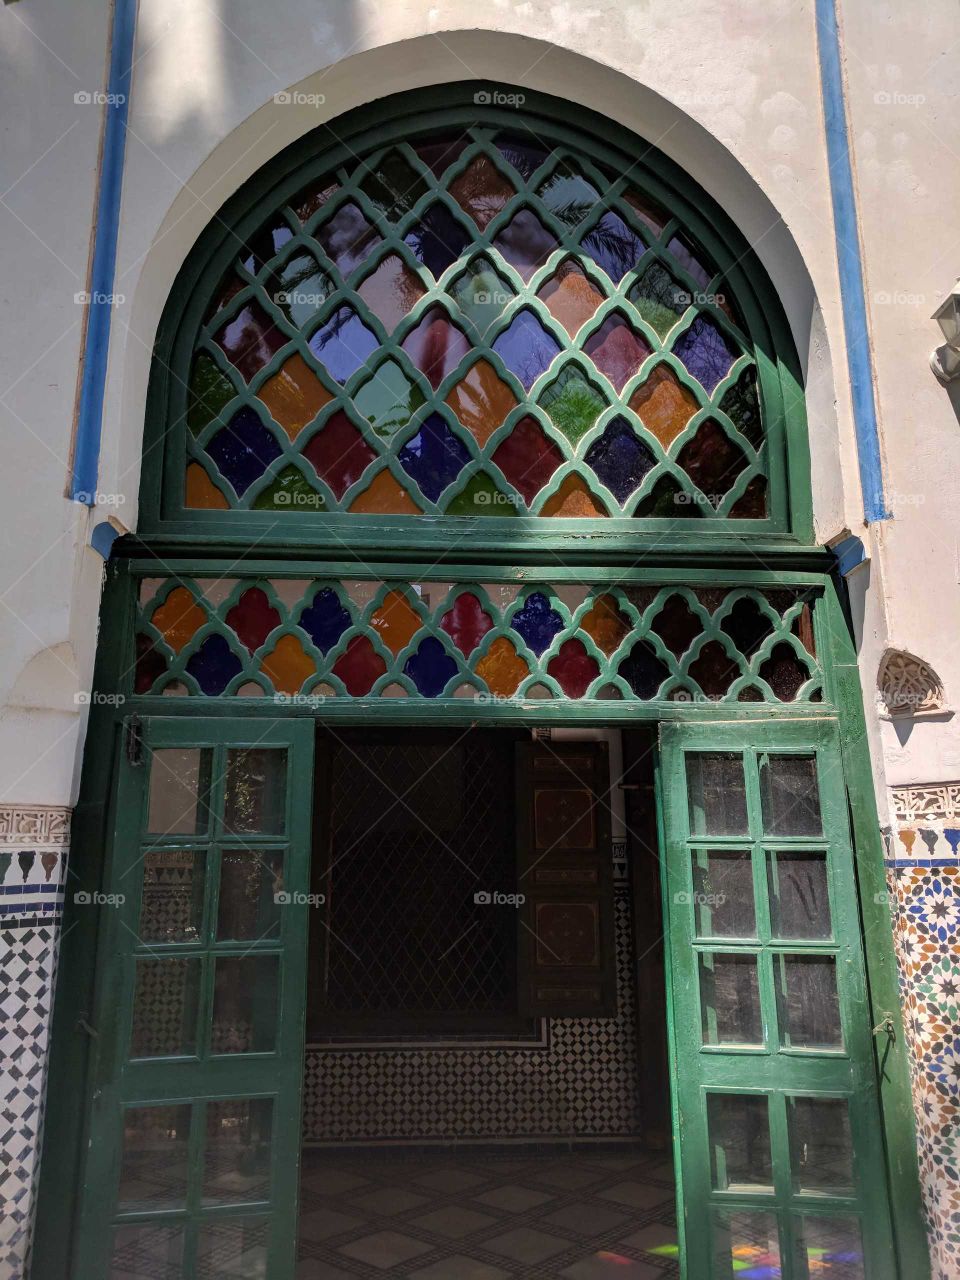 Ornate Green Door with Colorful Diamond Pattern Stained Glass and Ceramic Tile Mosaic Walls in the Bahia Palace in Marrakech in Morocco